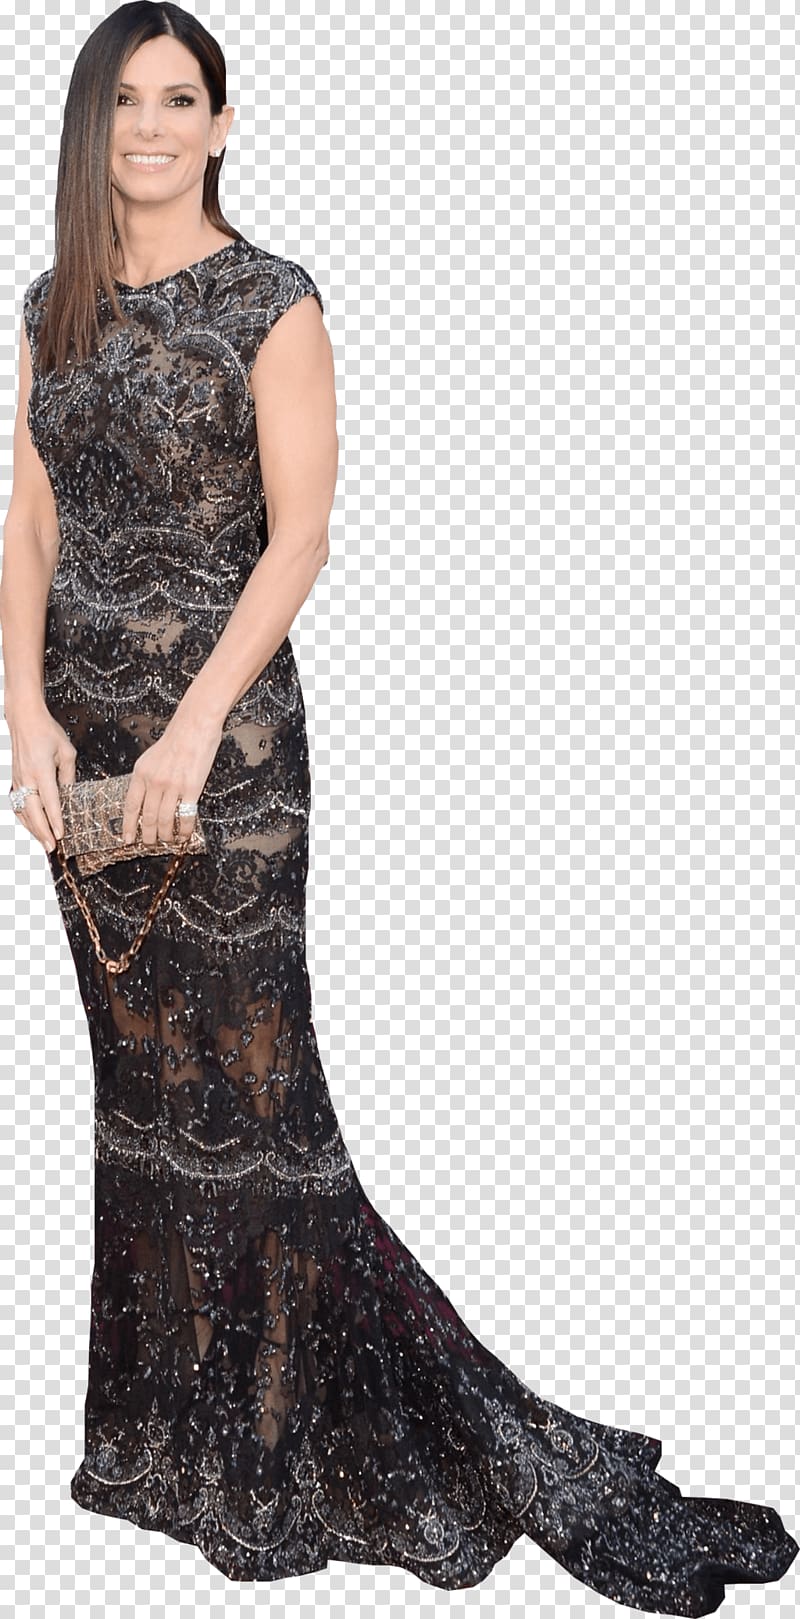 woman in black and gray floral sleeveless long dress, Sandra Bullock Party Dress transparent background PNG clipart